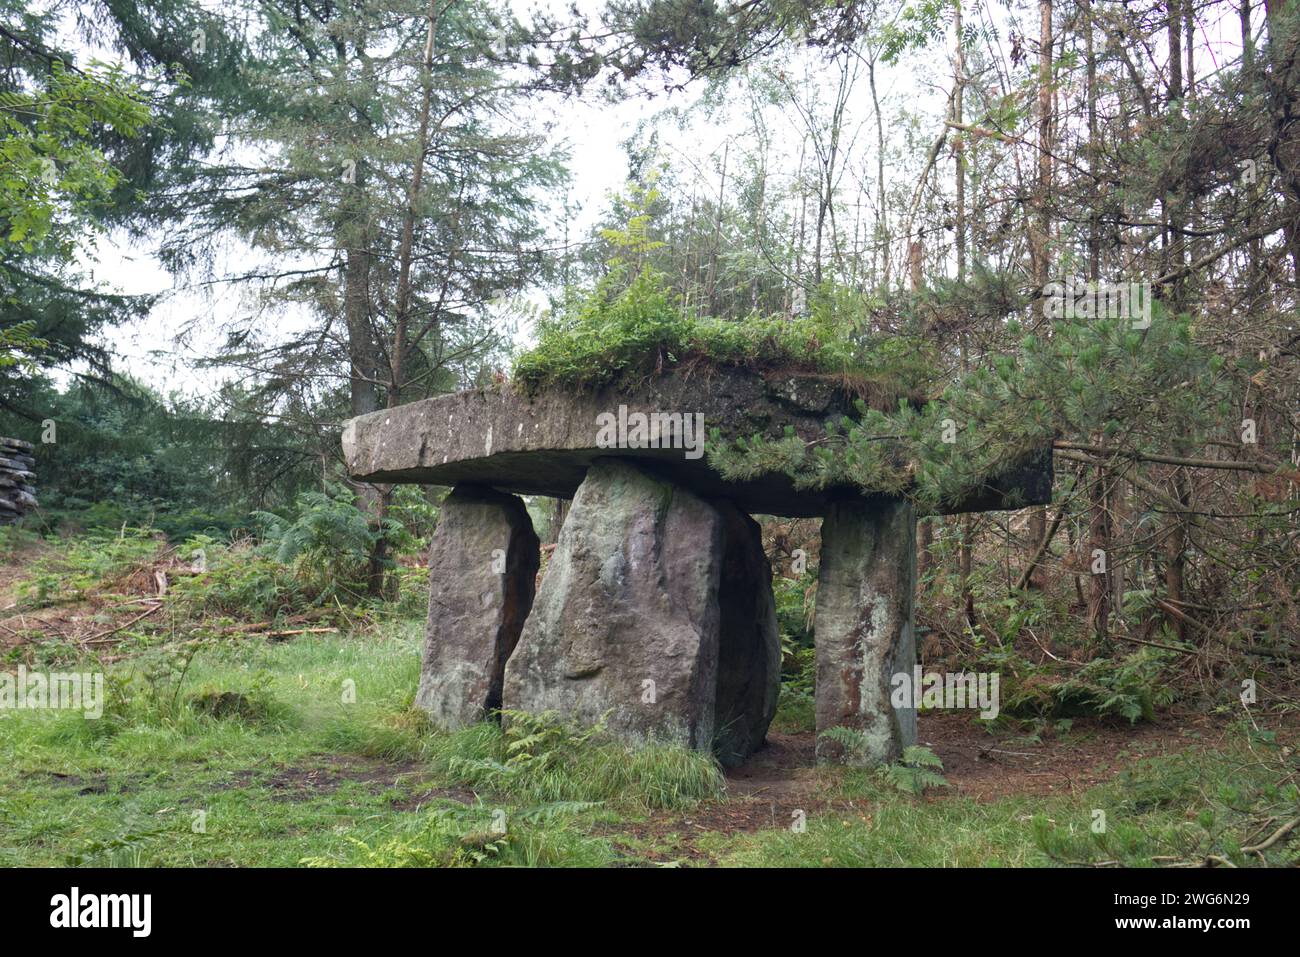 Temple of the Druids in Masham, Yorkshire Stock Photo